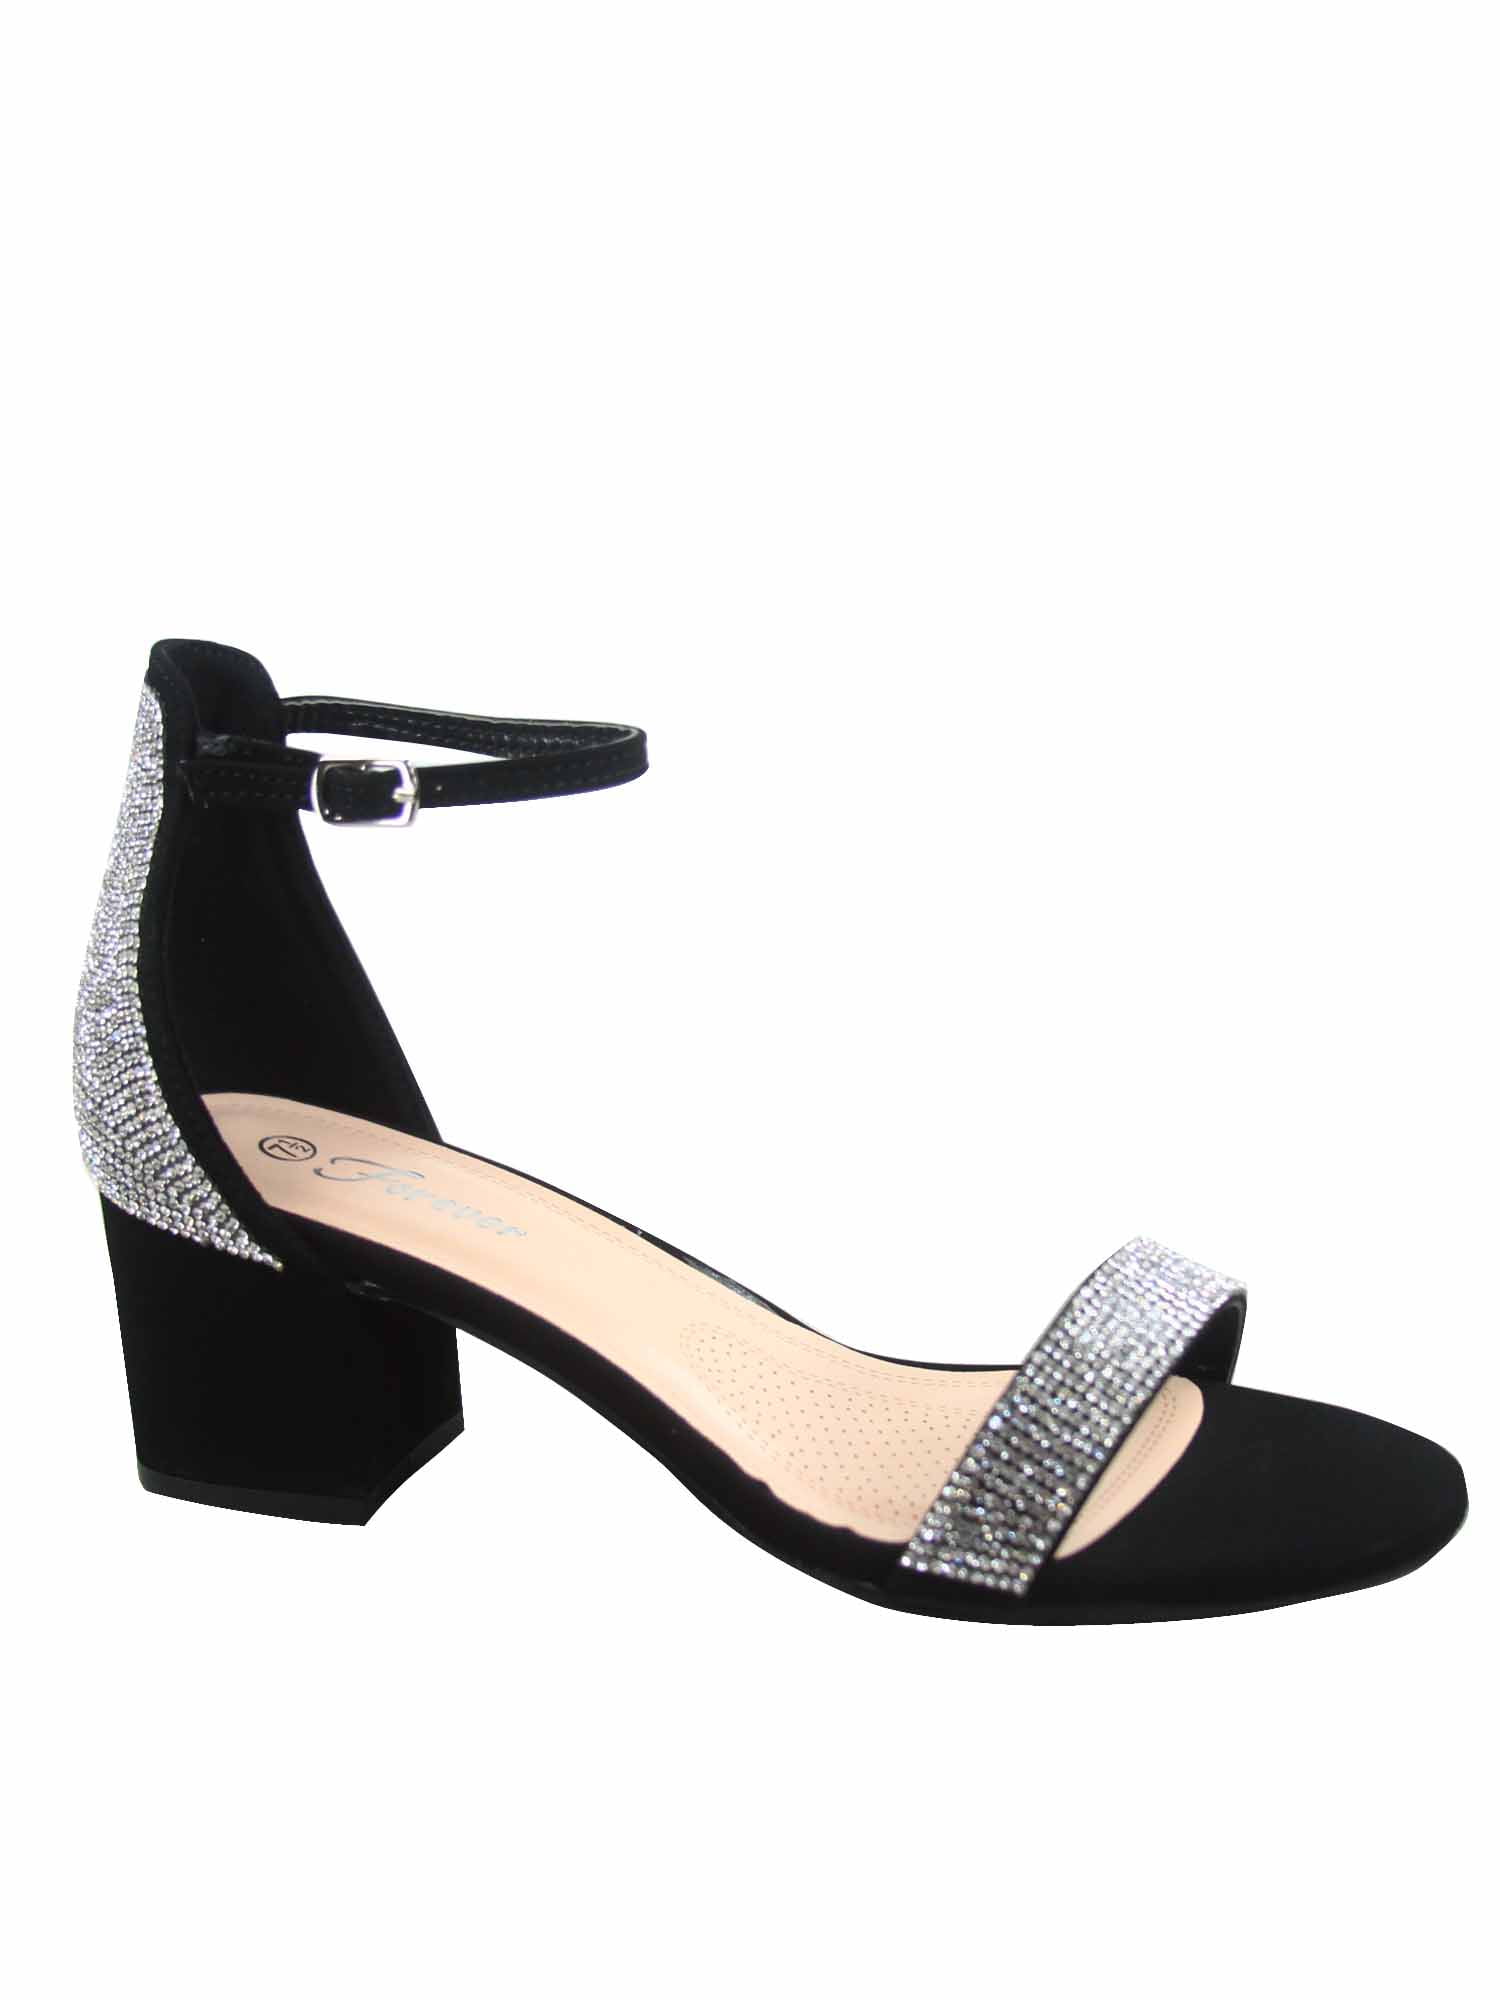 Nataly-10 Open Toe Rhinestone Ankle Strap Buckle Low Chunky Heels ...